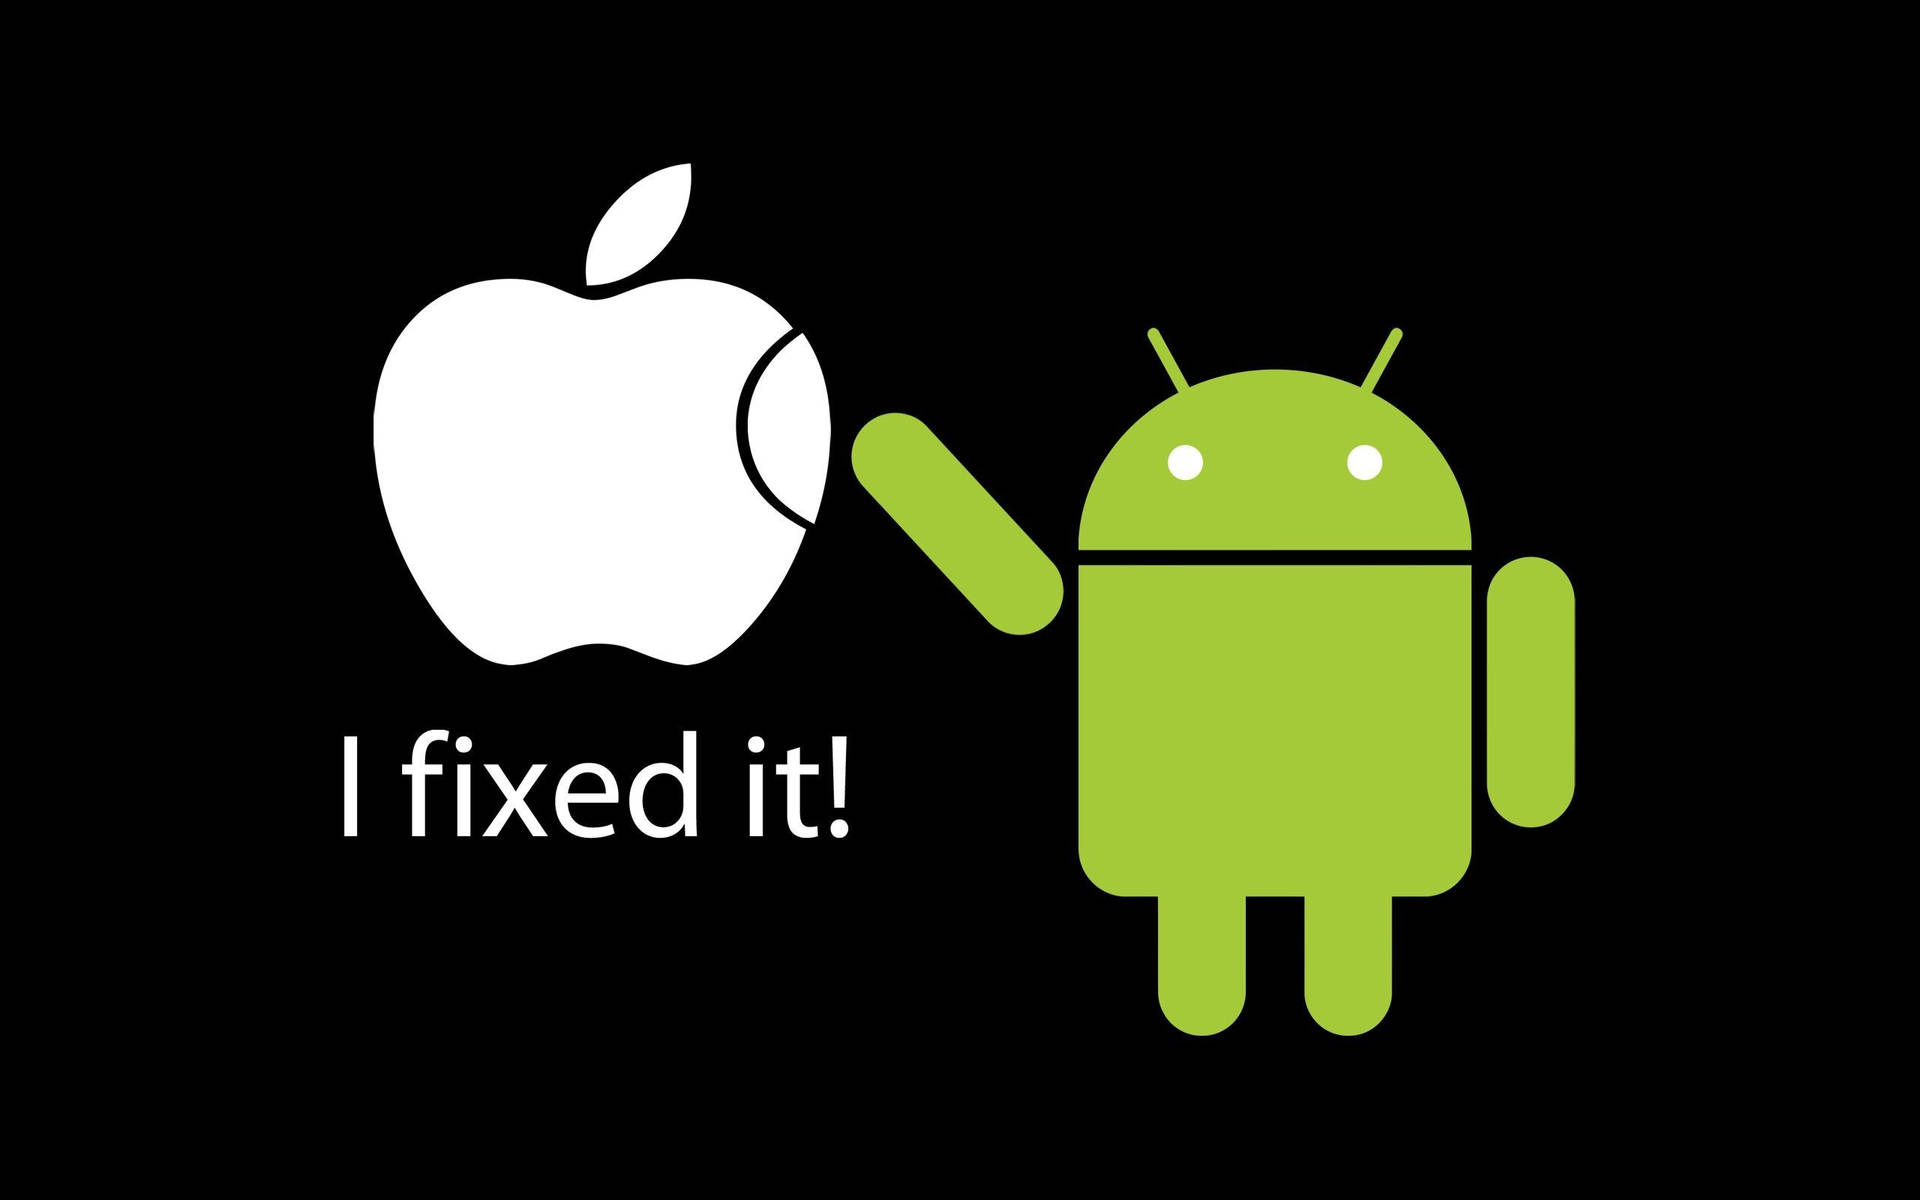 Funny Android And Apple Fan Art Wallpaper